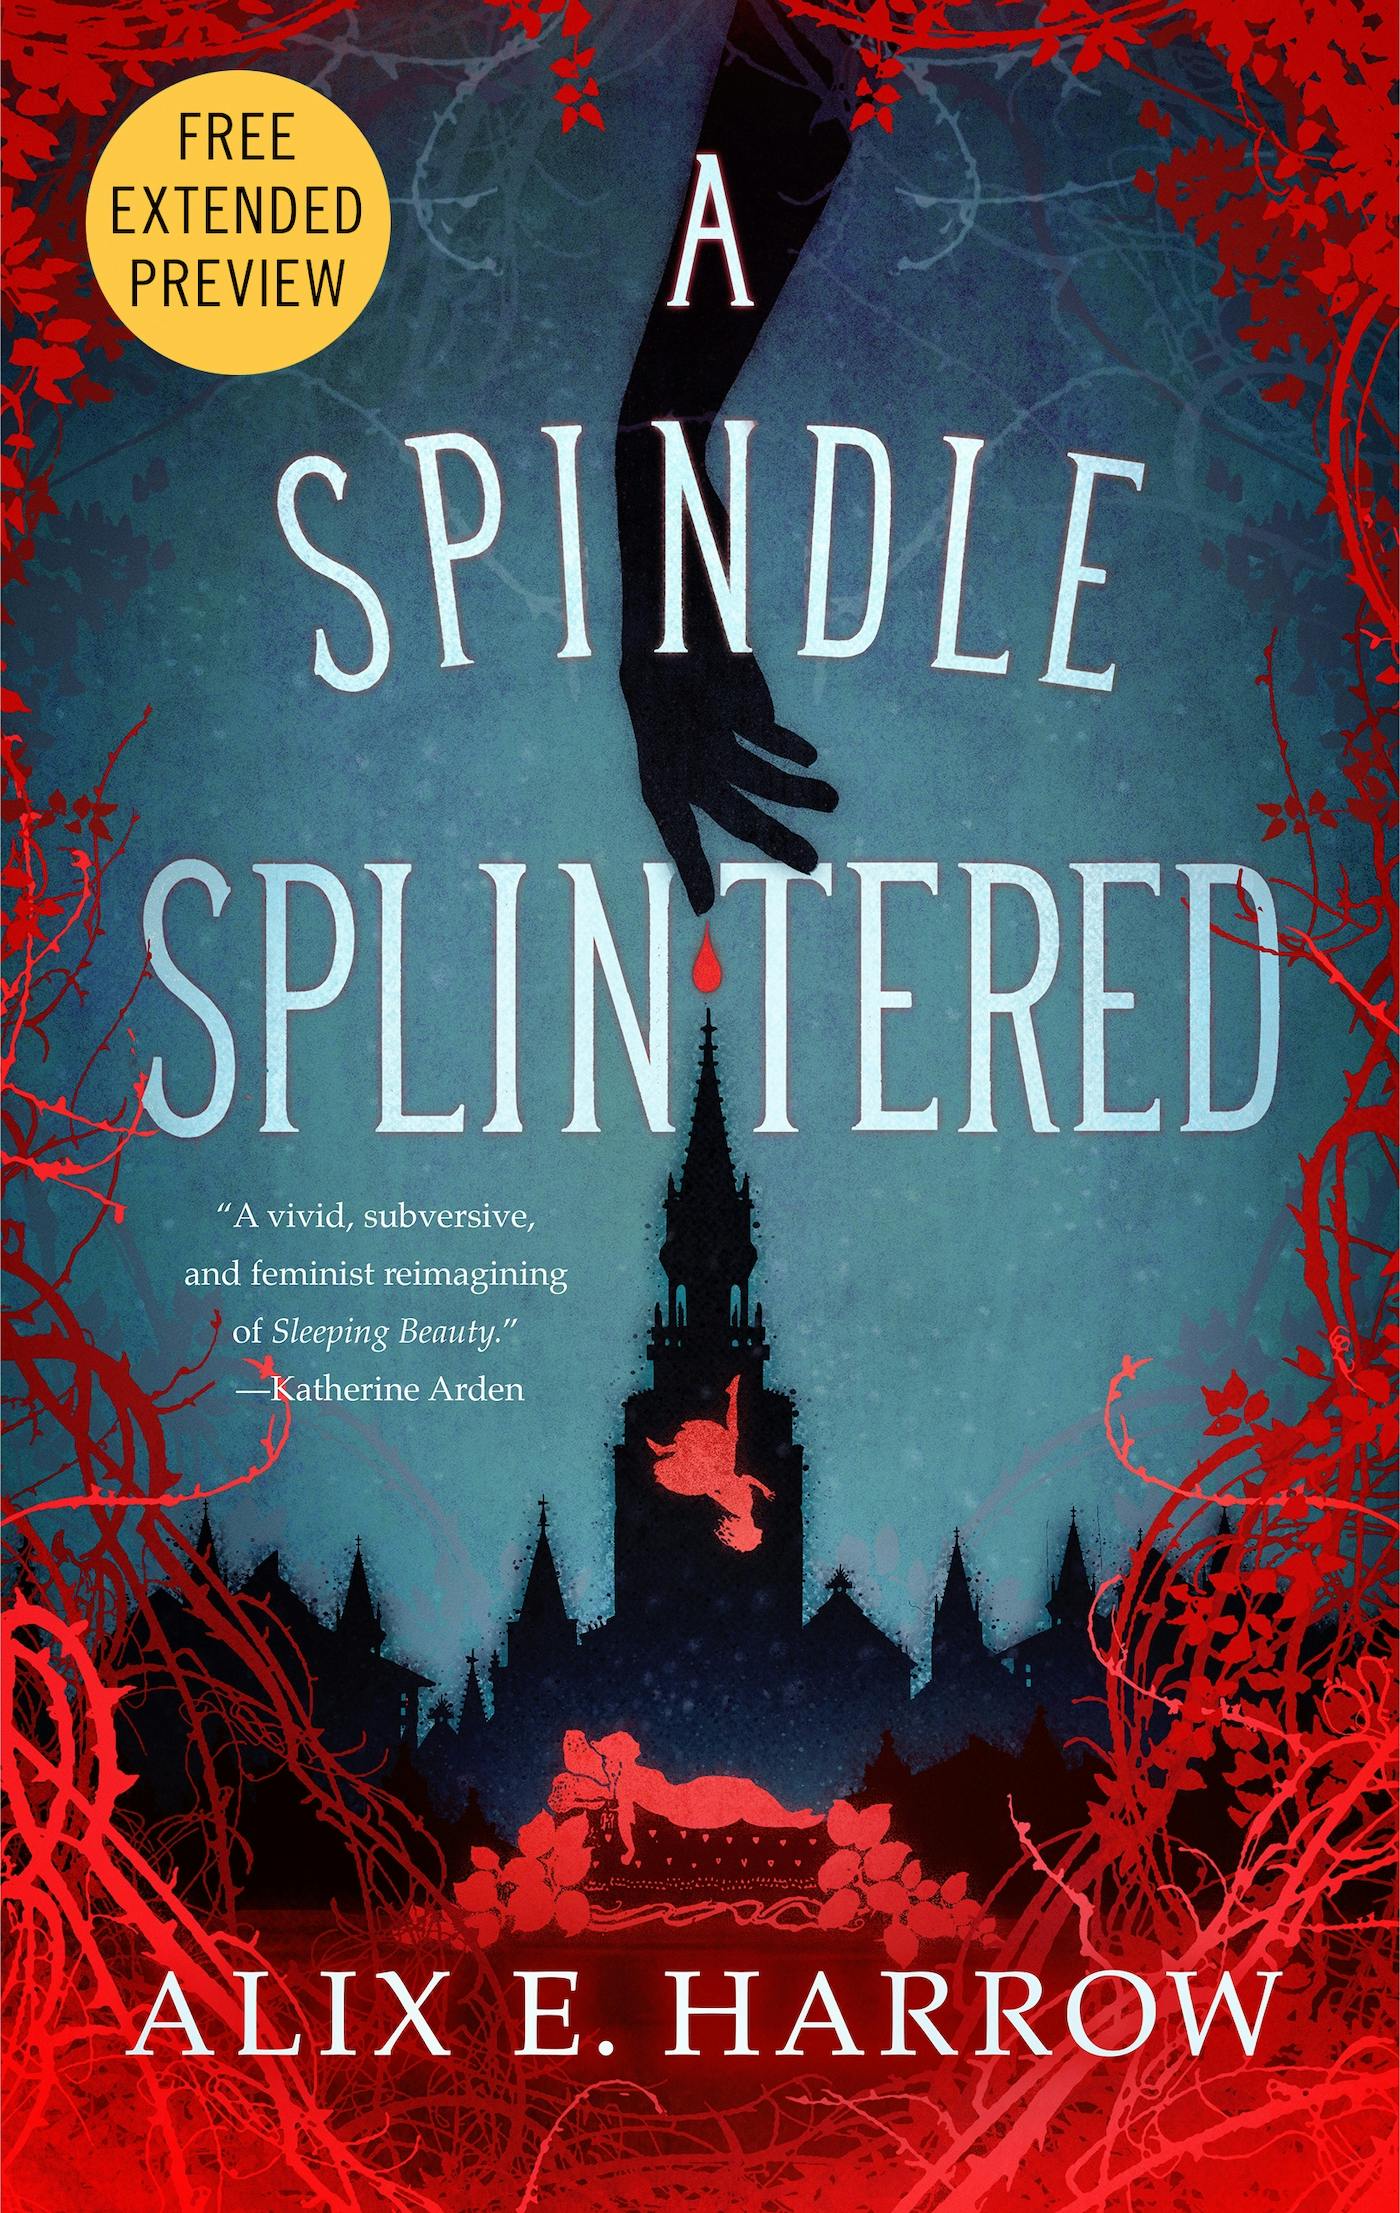 Cover for the book titled as: A Spindle Splintered Sneak Peek